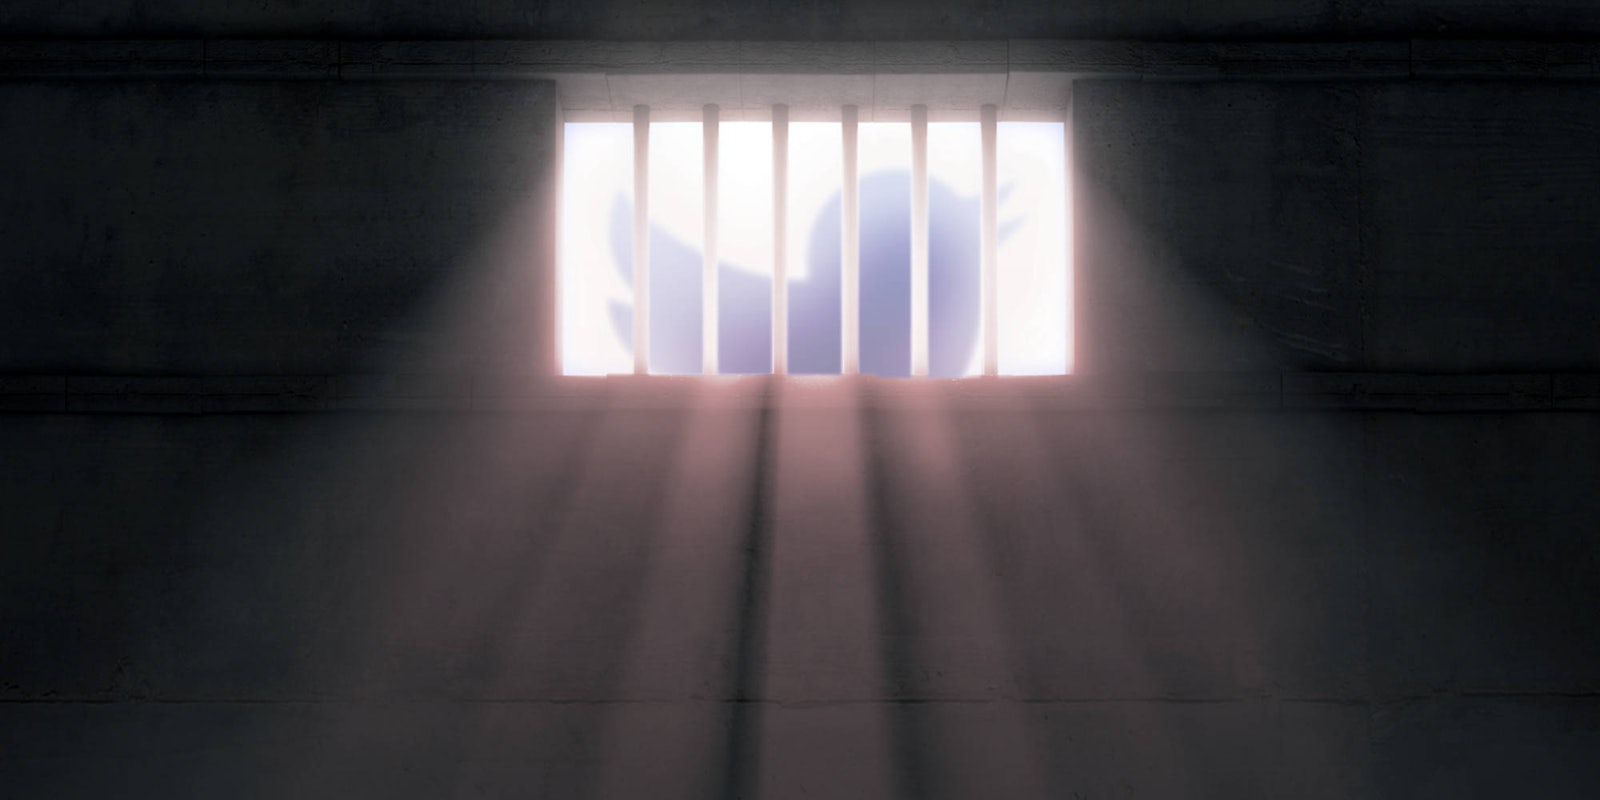 a camera view of inside a jail cell, with a twitter bird logo being shown through the bars